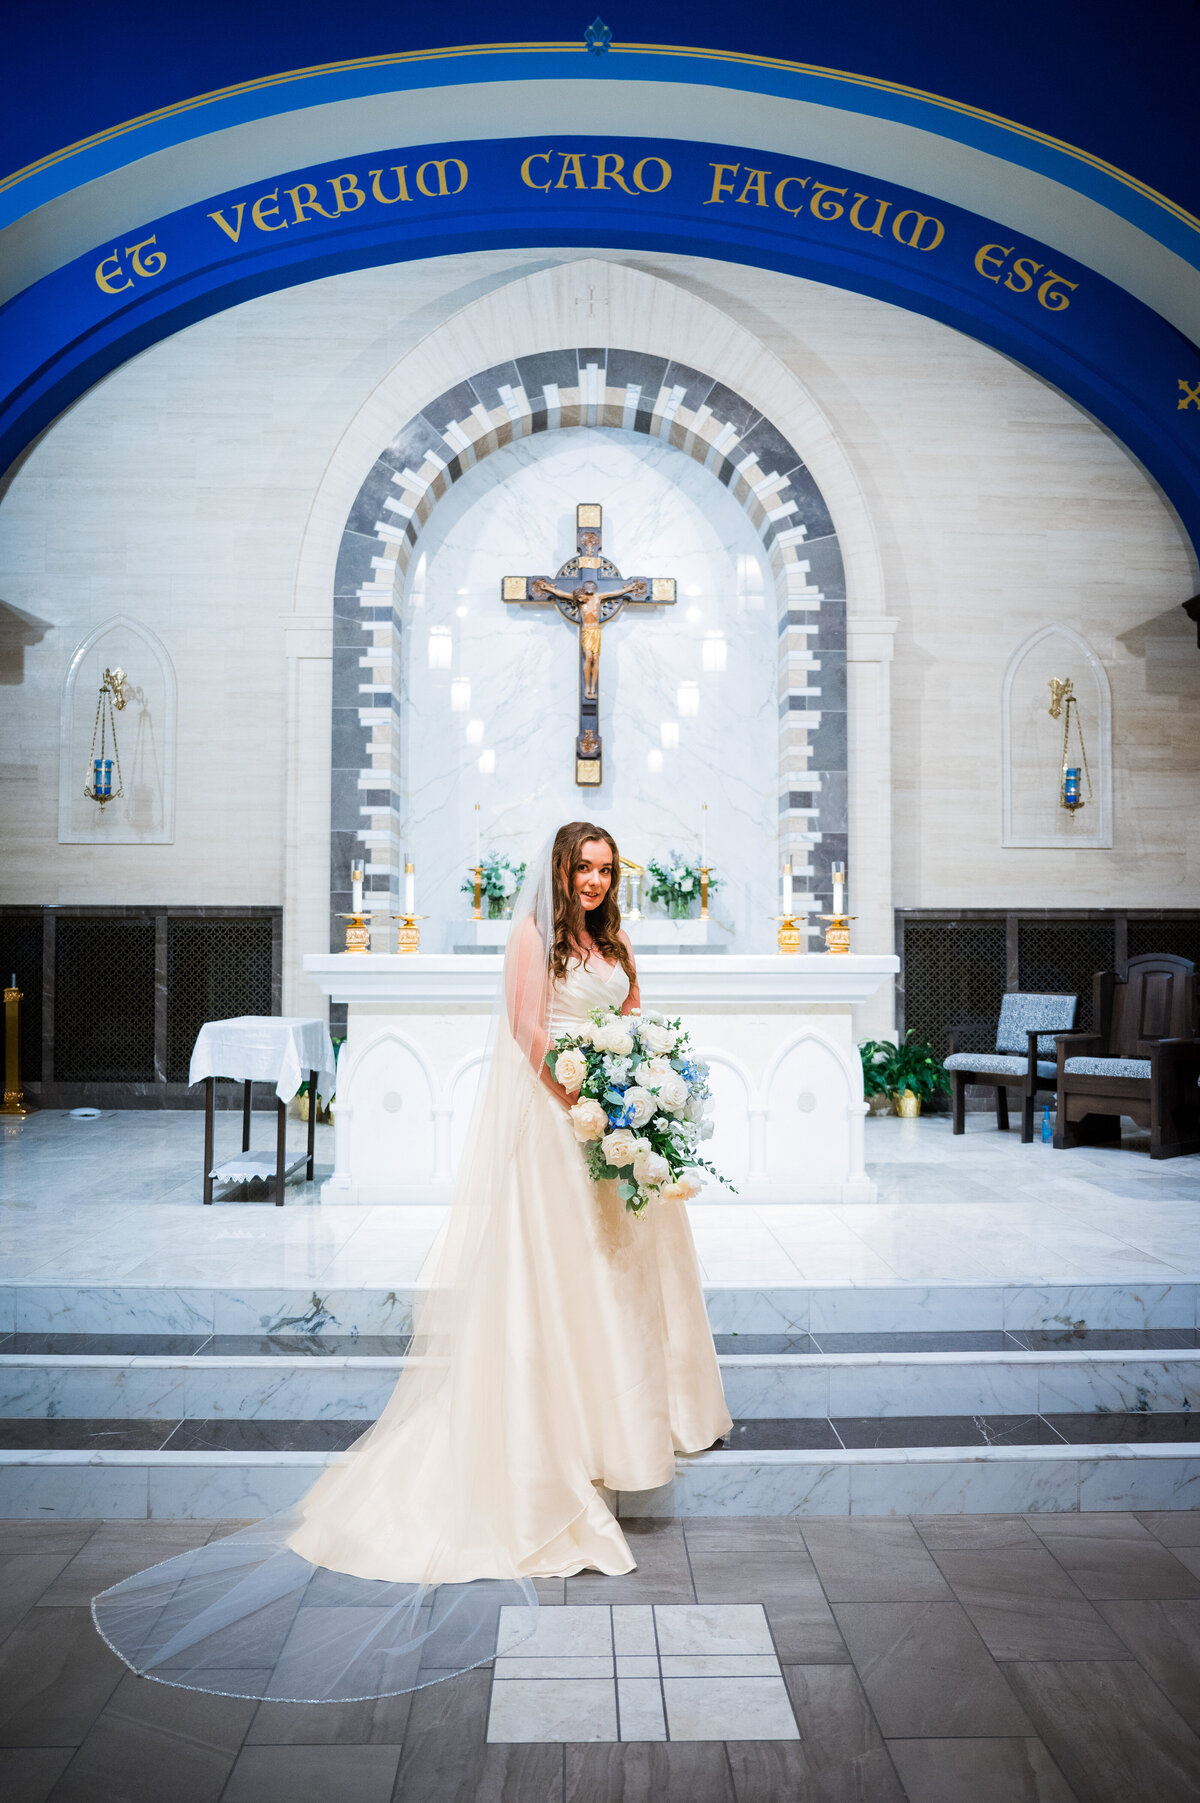 A bride gives the camera a soft smile as she stands on the altar of the church.